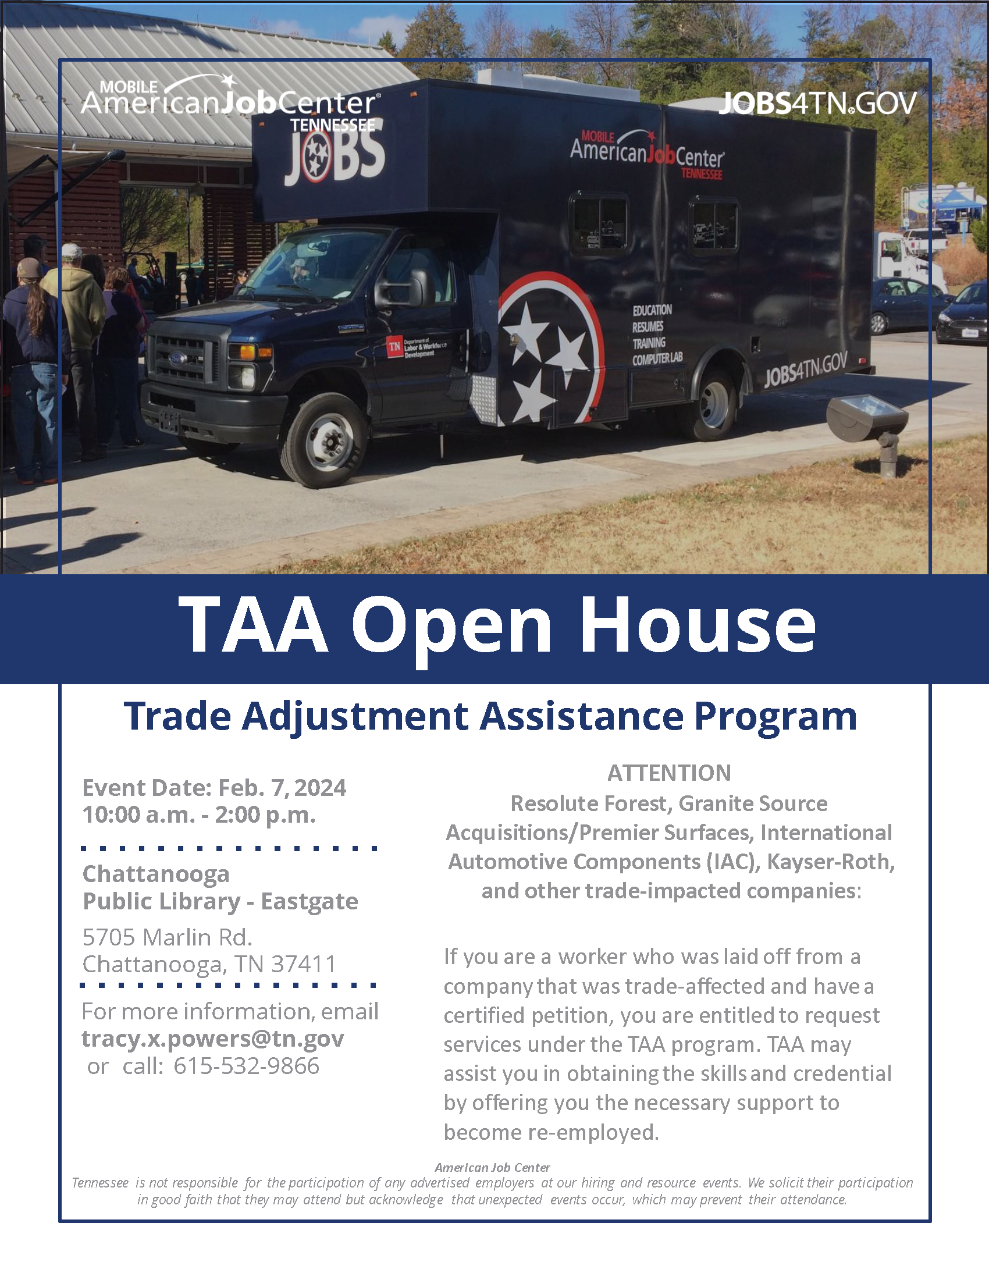 TAA Open House - Chattanooga, TN, 2/7/2024, 10 a.m. to 2 p.m. EST